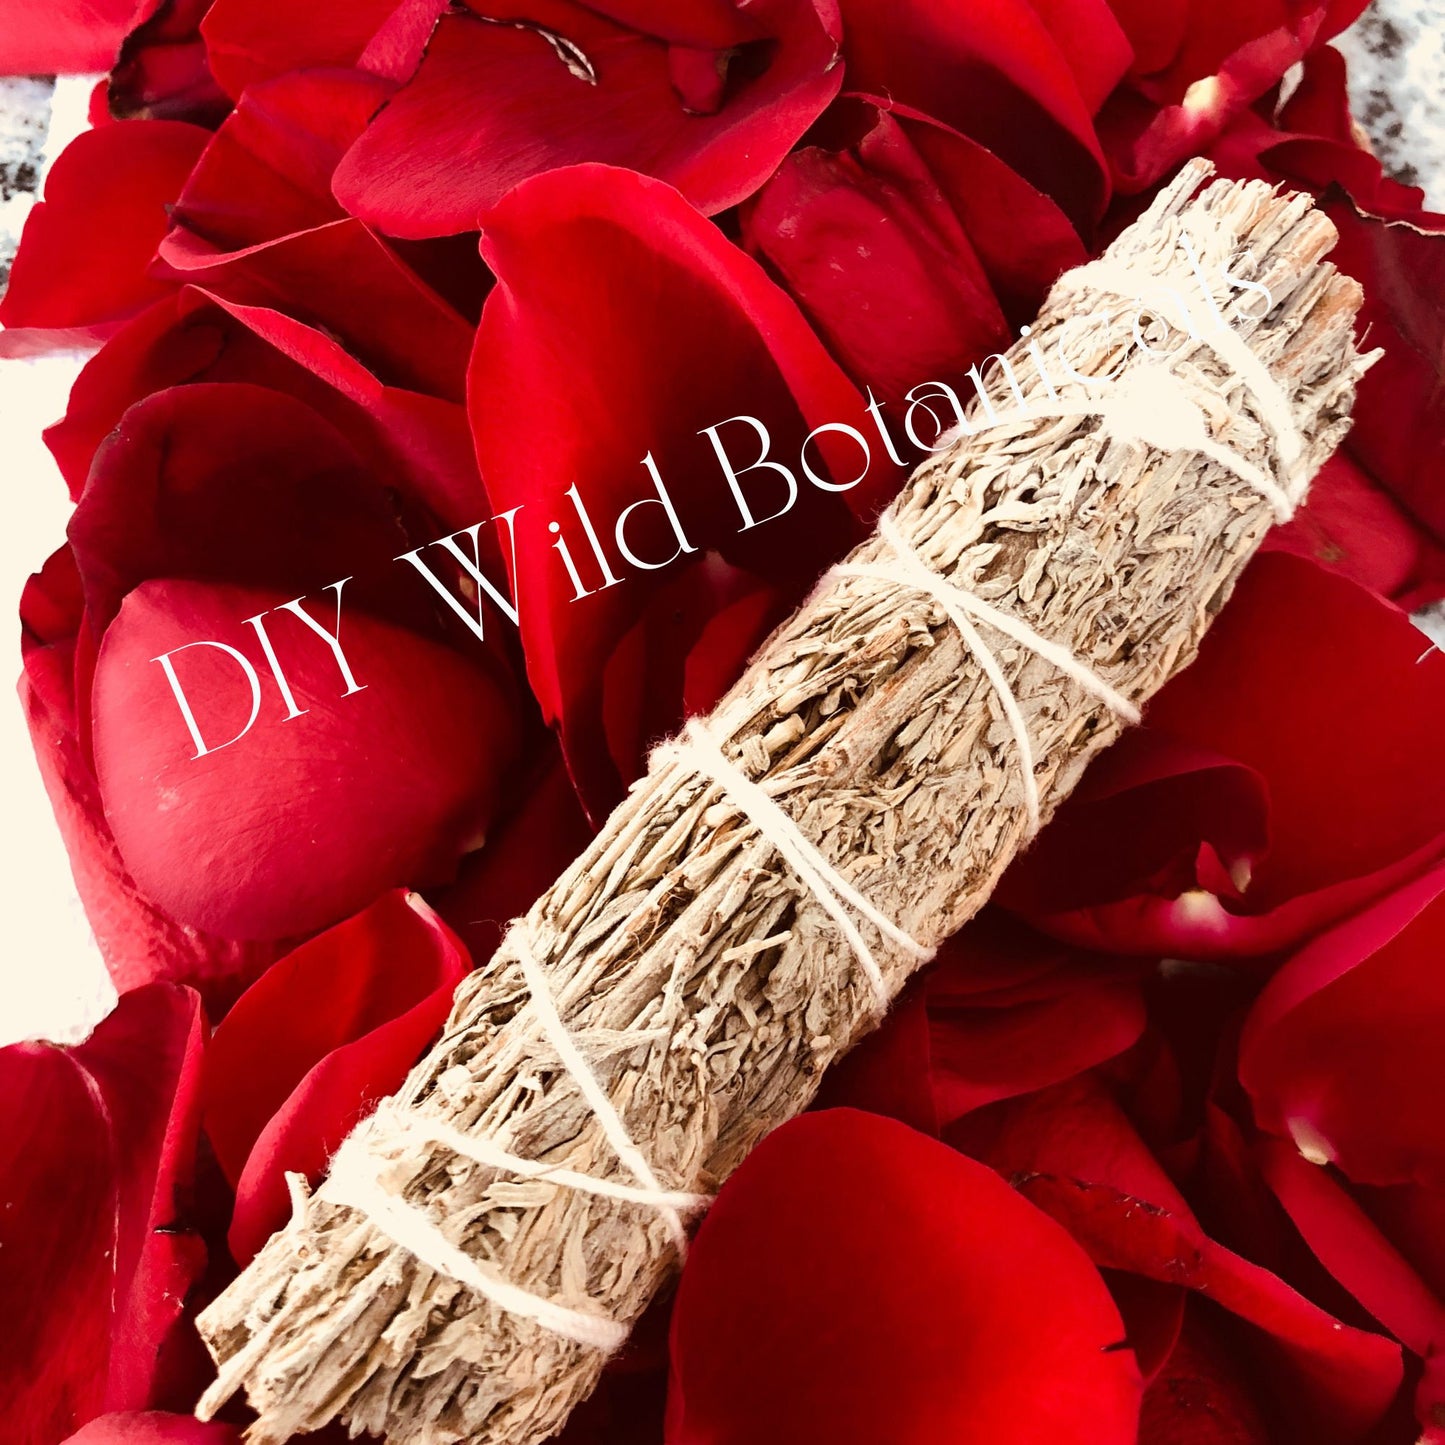 Smudge Stick Sage, Bulk Herbs, Loose Herbs, Assorted Herbs, Magical Herbs, Smudge Wand, Cleansing Tools, Blue Sage Bundle, 9' Smudge Stick